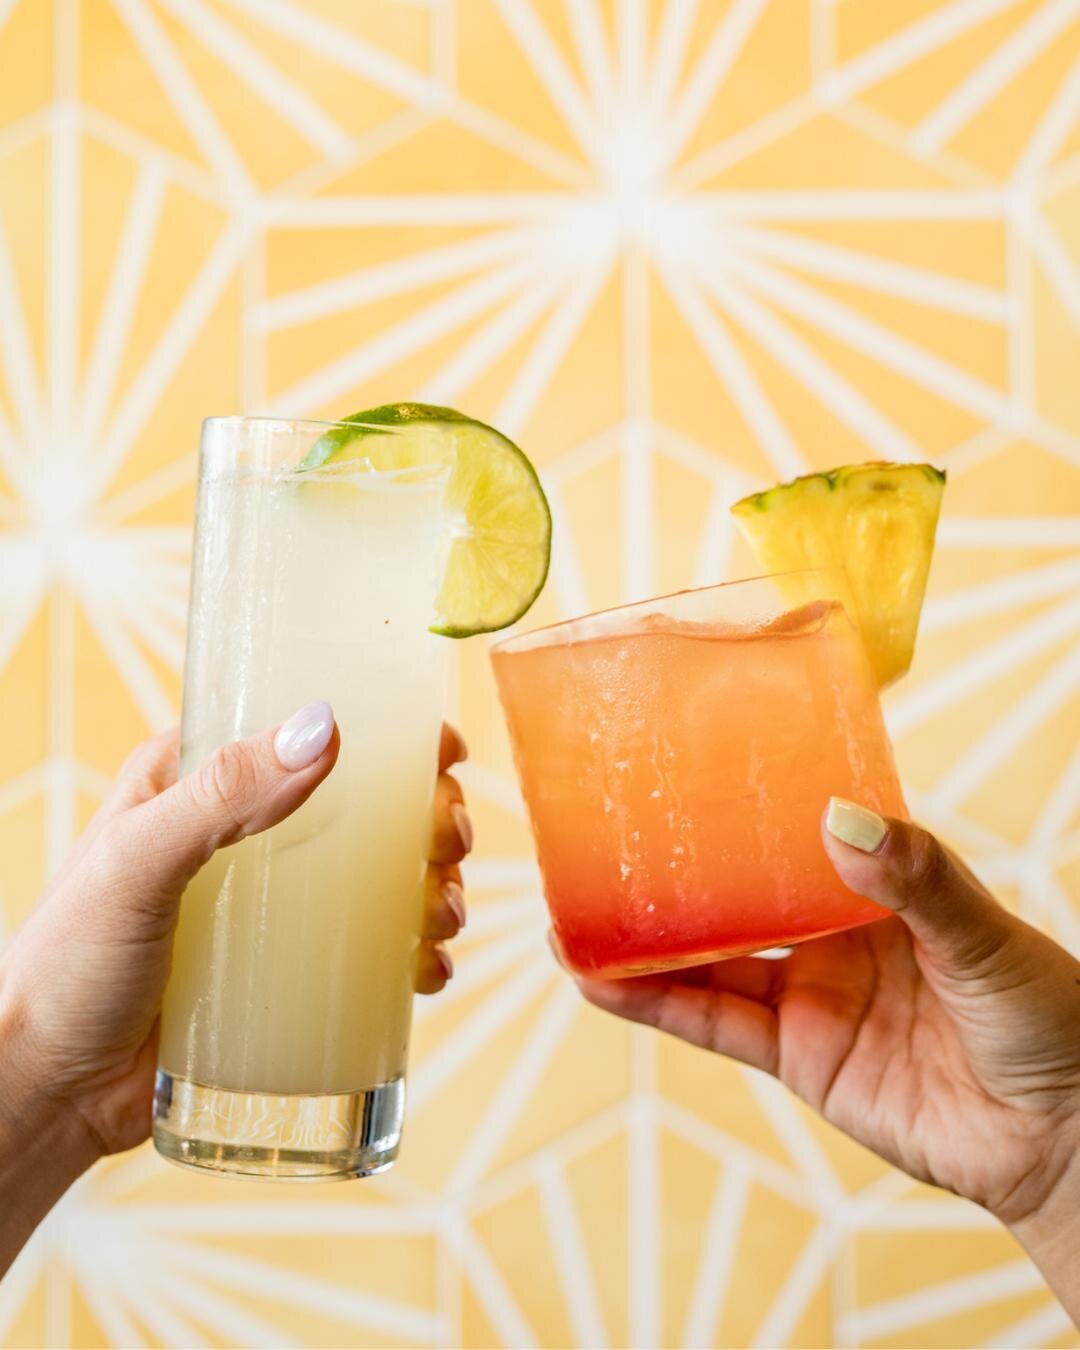 We're psyched the weekend is here. Which cocktail are you kicking off your Saturday with, The Skinny or Tiki? ⬇️⁠
⁠
⁠
⁠
⁠
⁠
⁠
#puretaco #mypuretaco #carlsbad #sandiego #sdfoodie #northcountysd #carlsbadvillage #carlsbadfoodie #carlsbadeats #carlsbadc